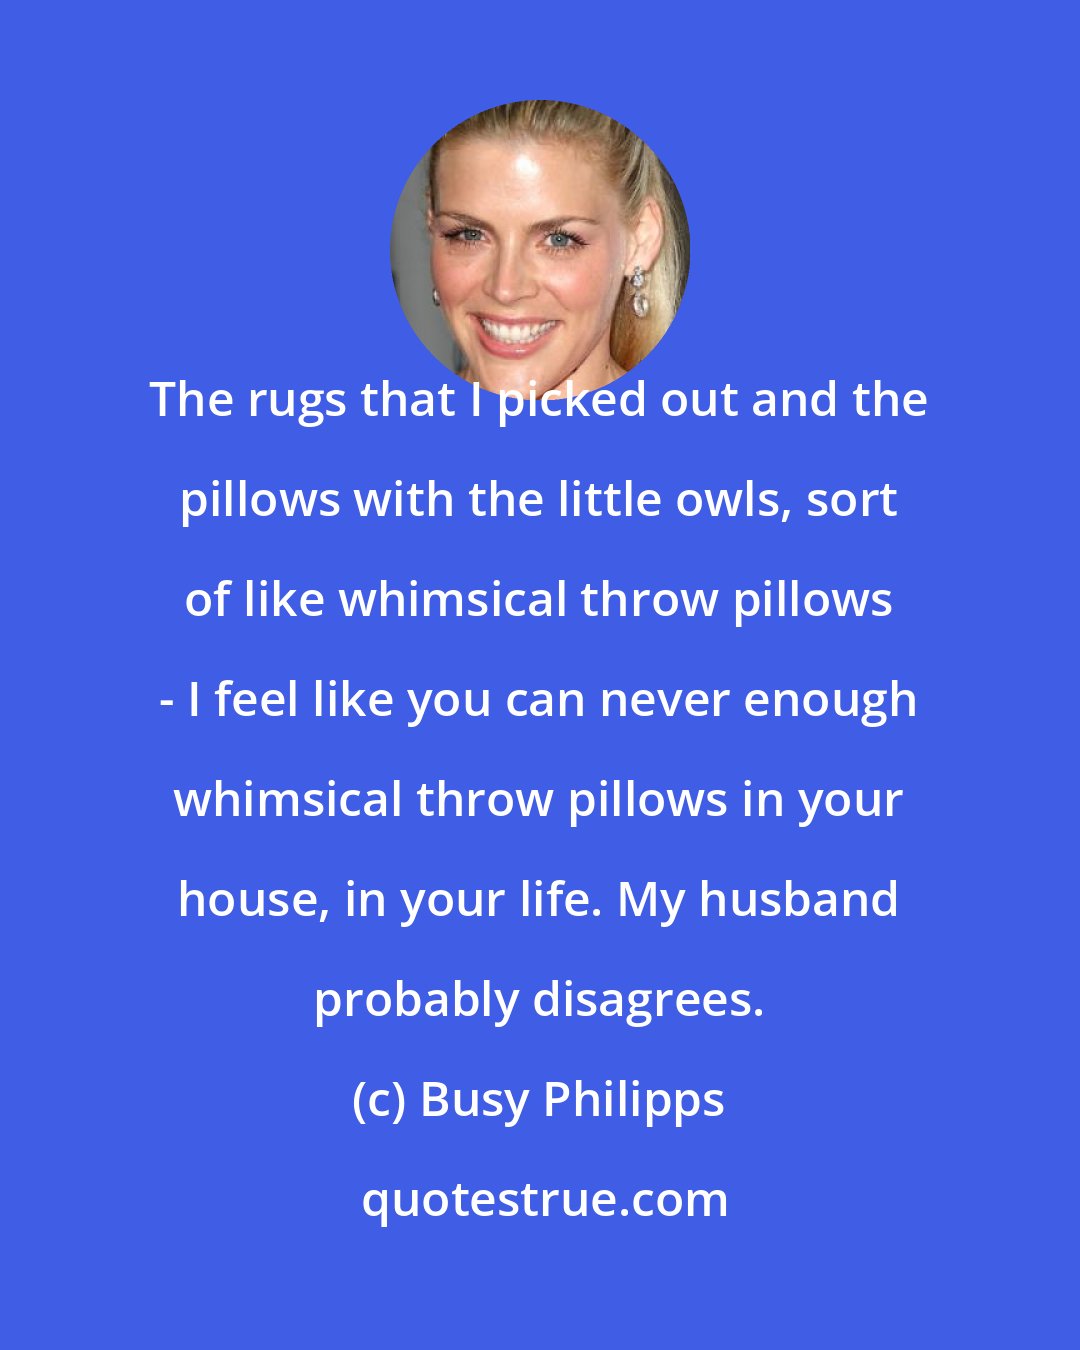 Busy Philipps: The rugs that I picked out and the pillows with the little owls, sort of like whimsical throw pillows - I feel like you can never enough whimsical throw pillows in your house, in your life. My husband probably disagrees.